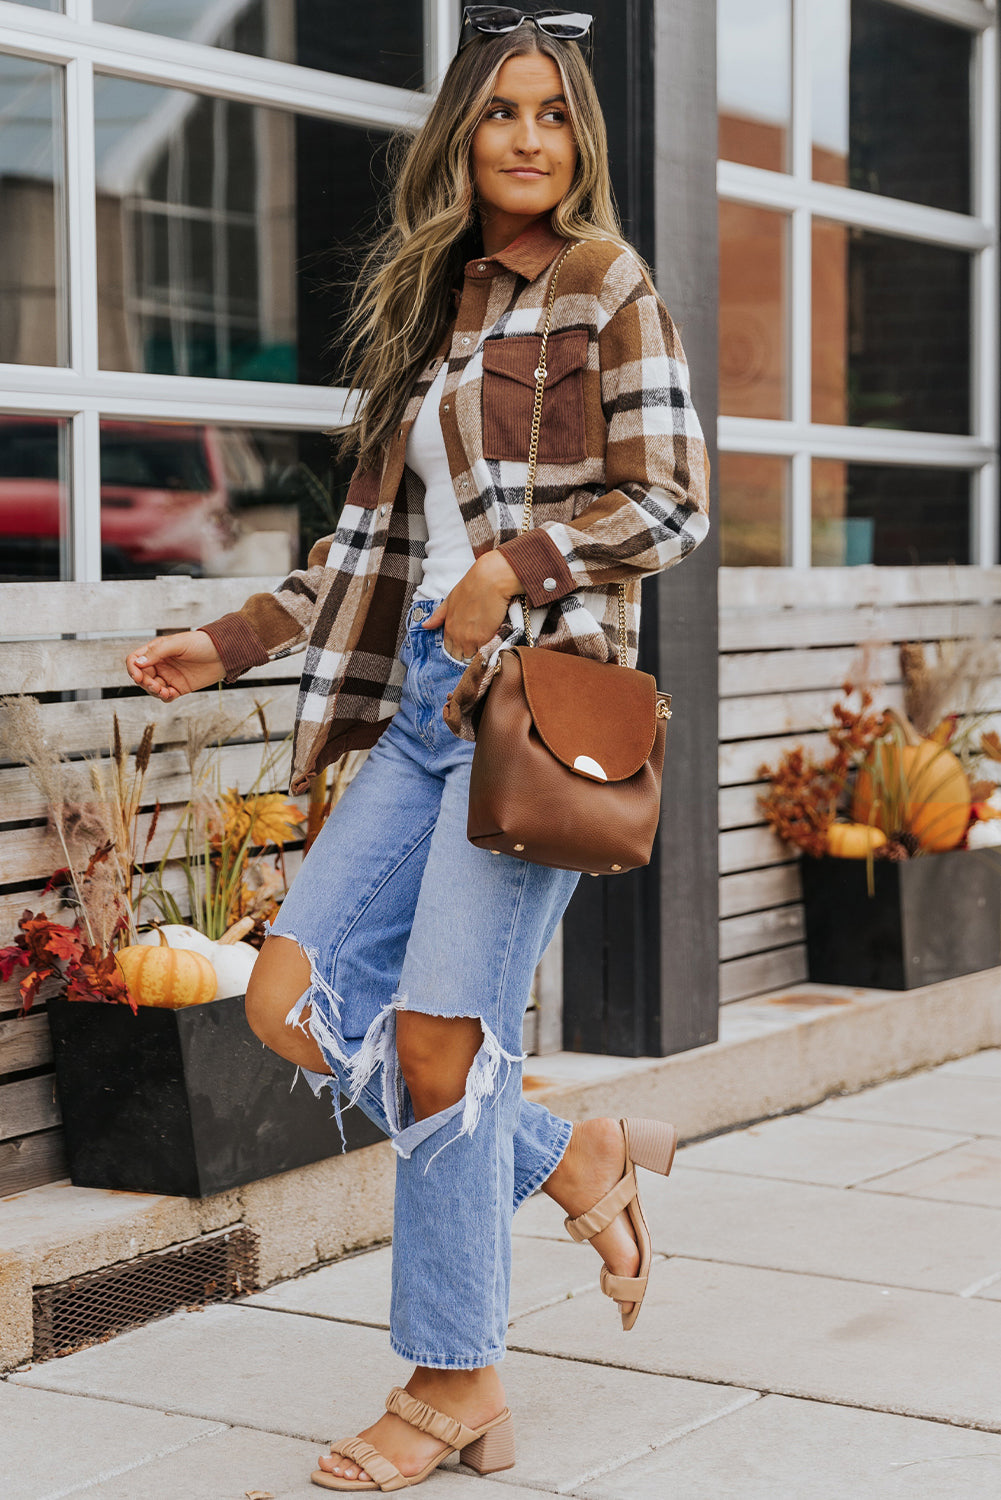 Brown Pocketed Buttoned Plaid Shirt Jacket